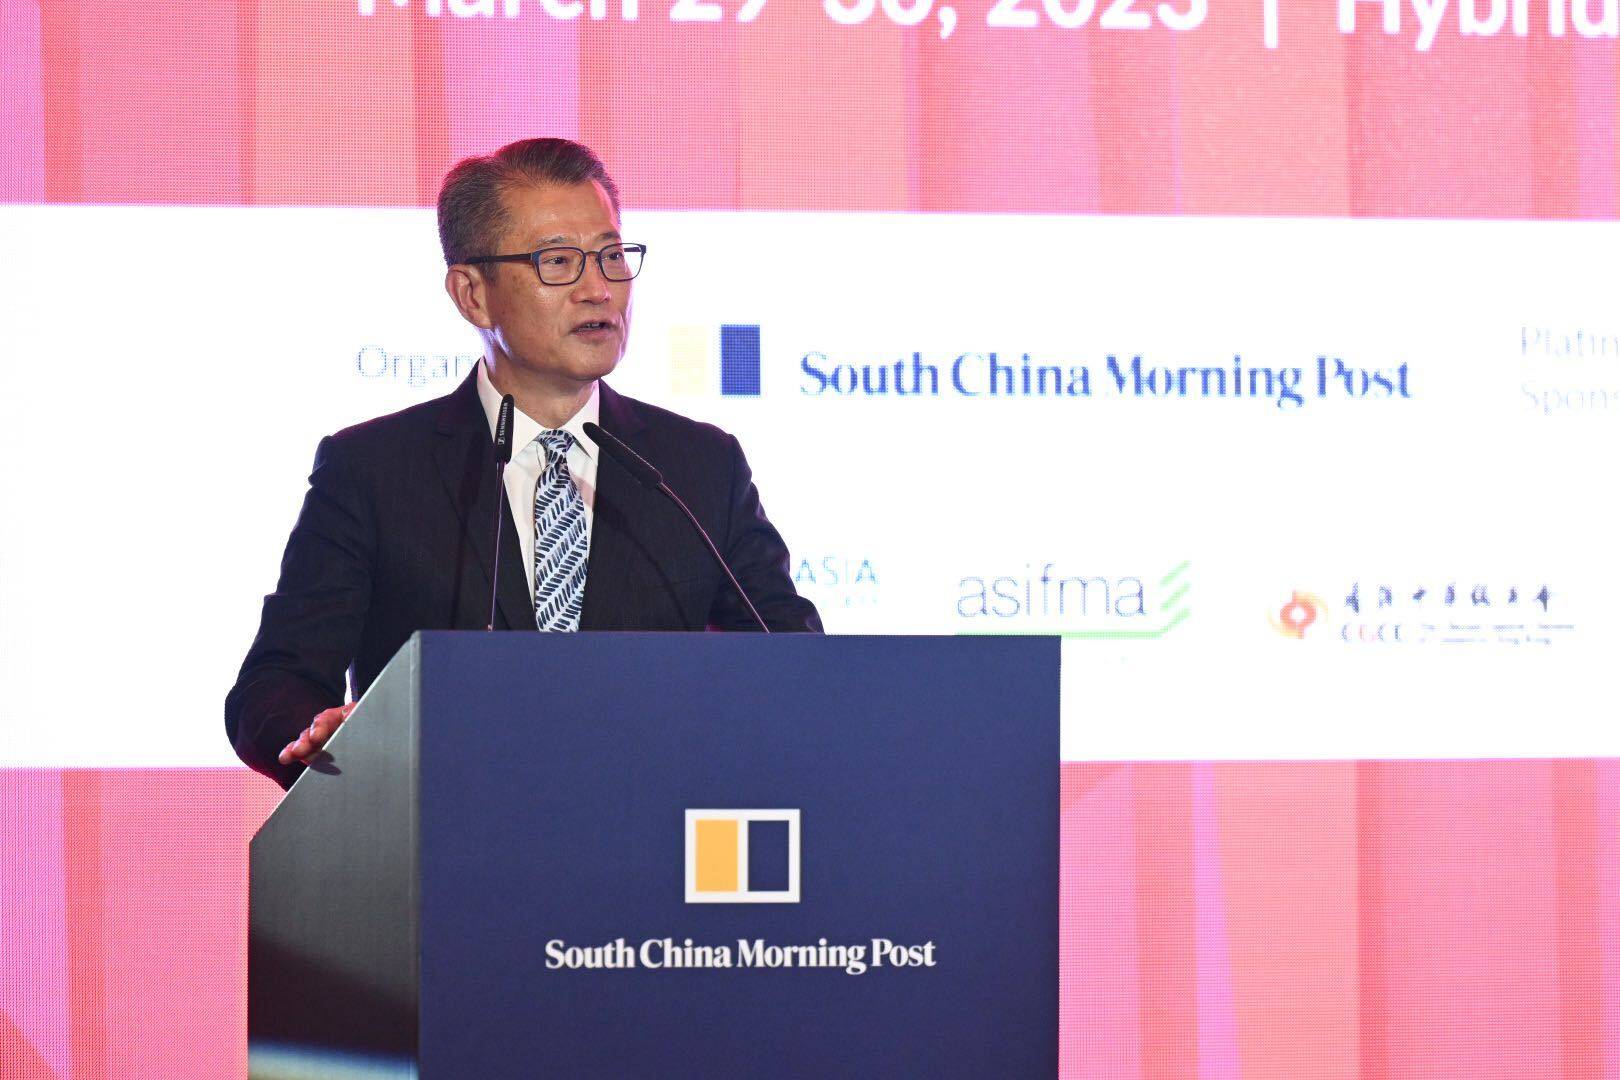 Hong Kong Financial Secretary Paul Chan Mo-po speaks at the SCMP’s China Conference: Southeast Asia on Wednesday in Singapore. Photo: Handout